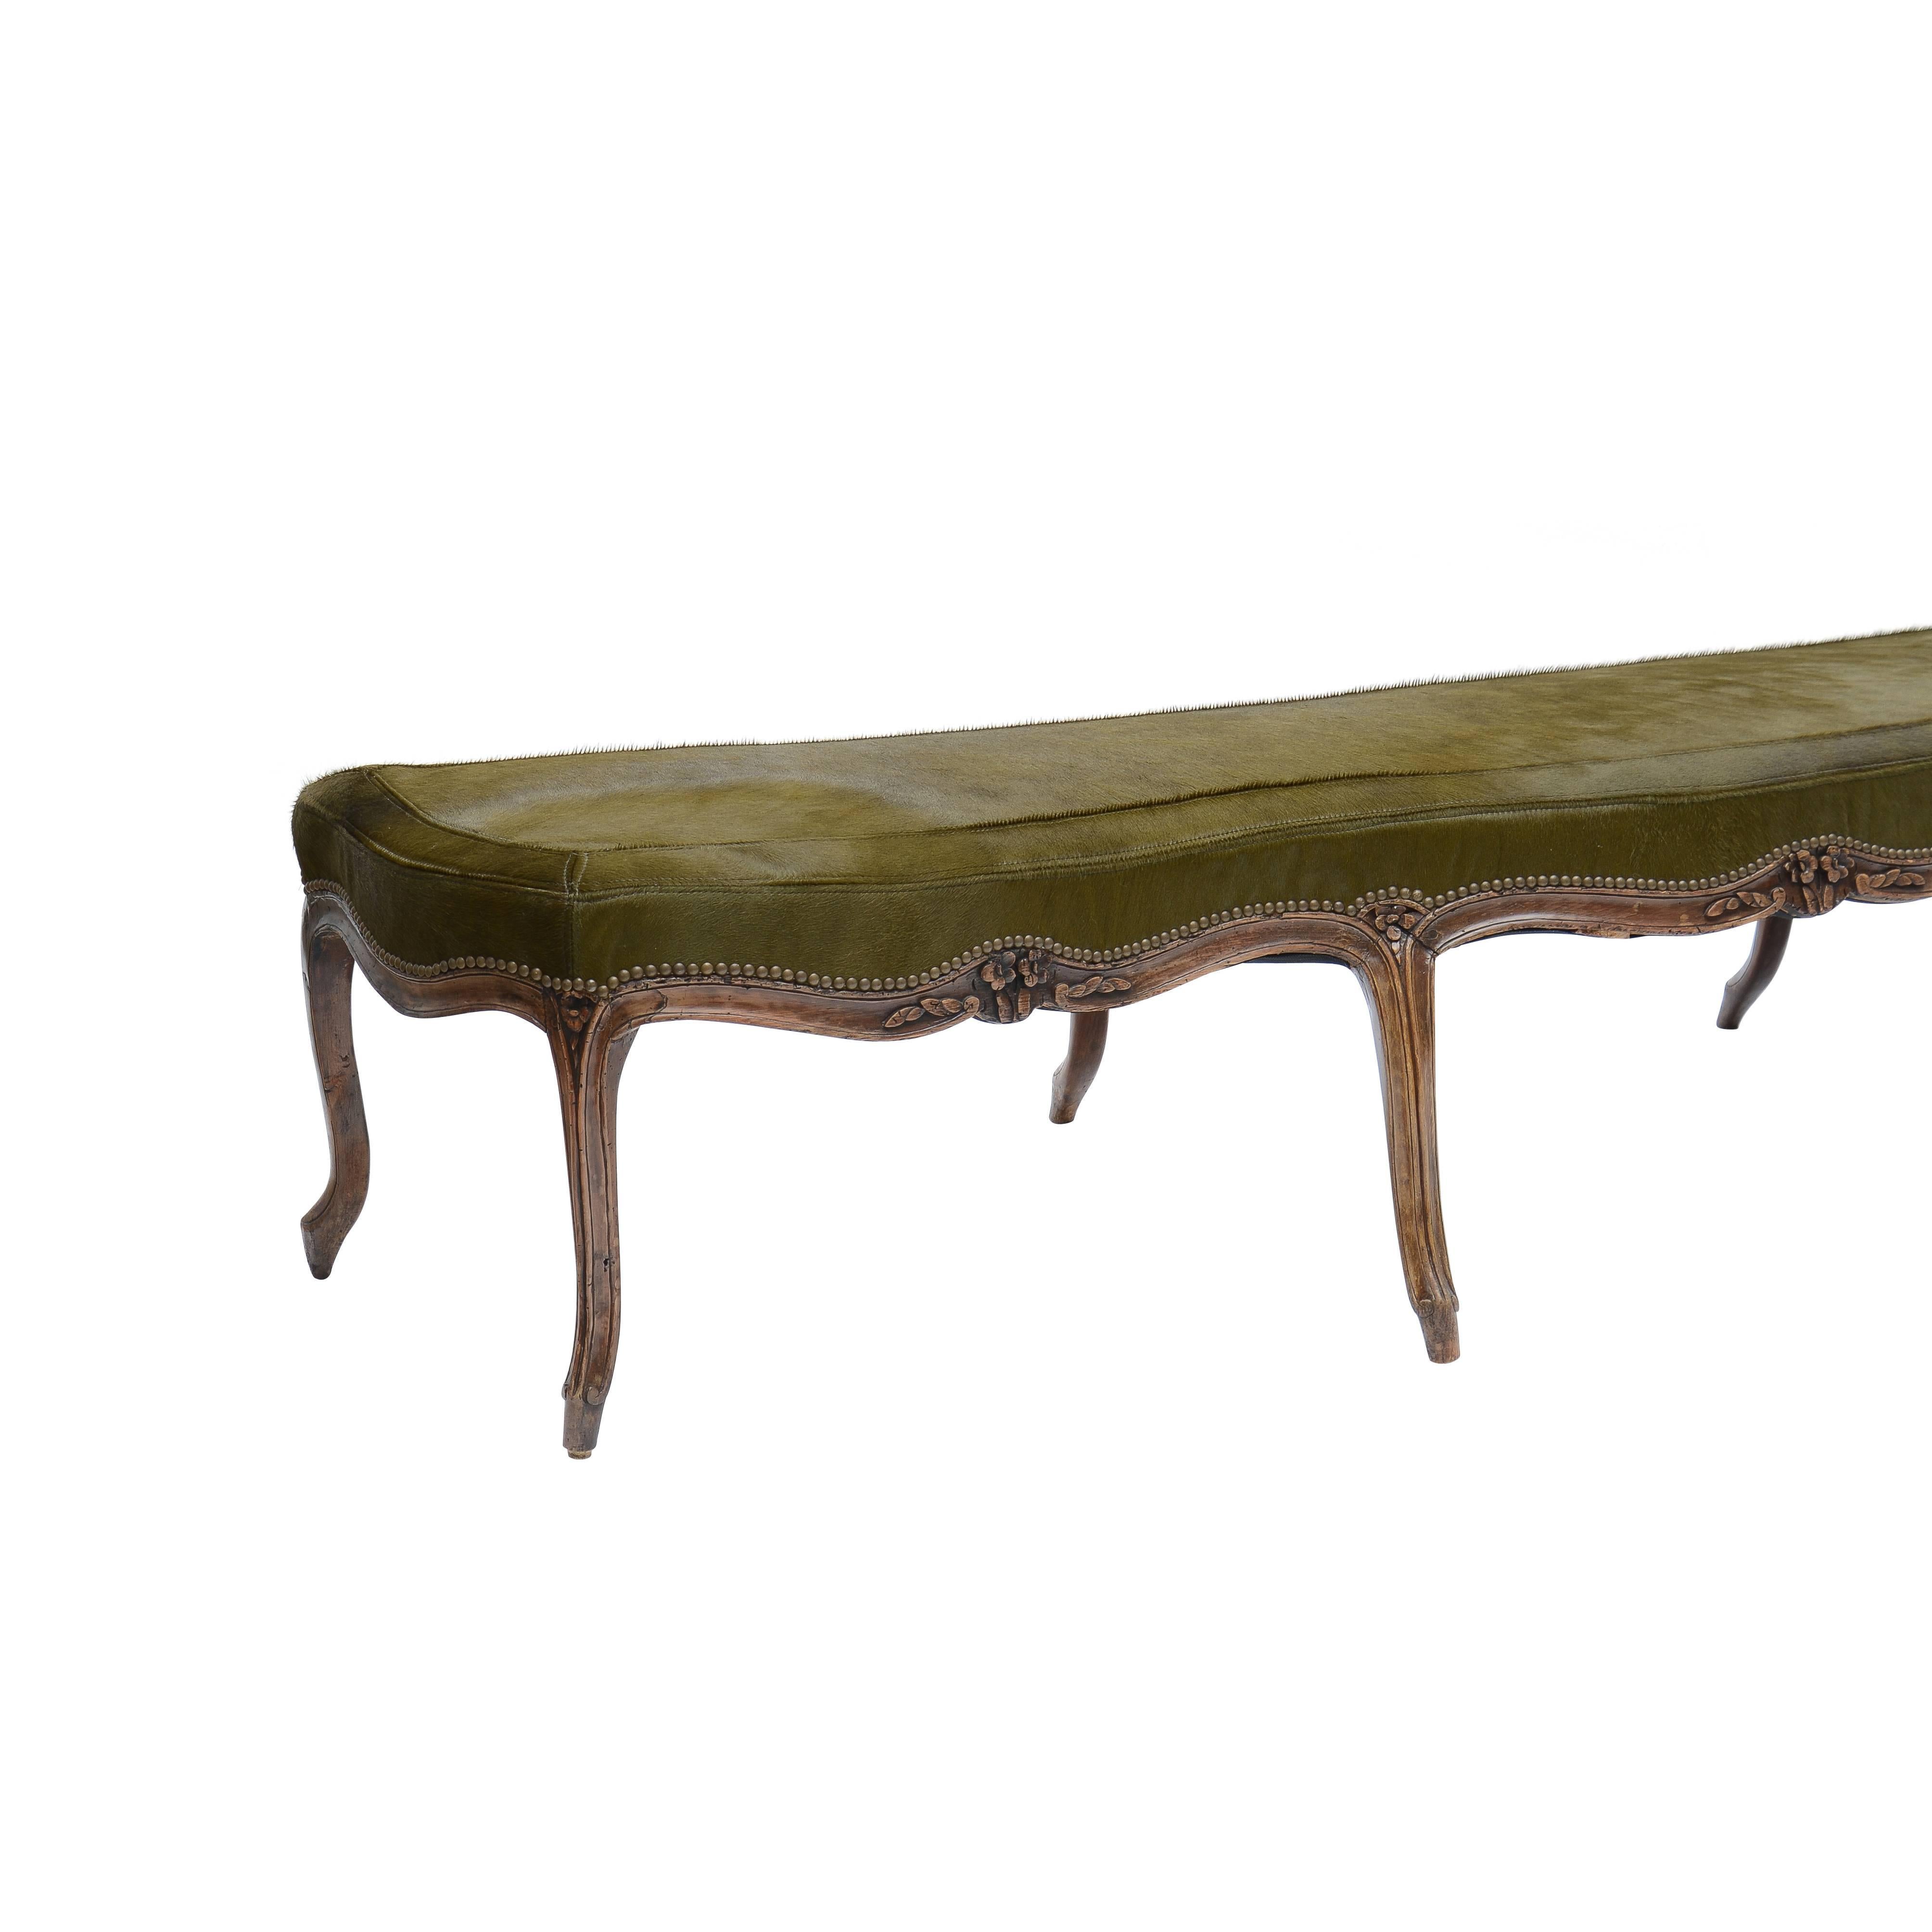 Louis XV style carved wood bench on cabriole legs upholstered in moss green hair on hide with saddle stitch detail.